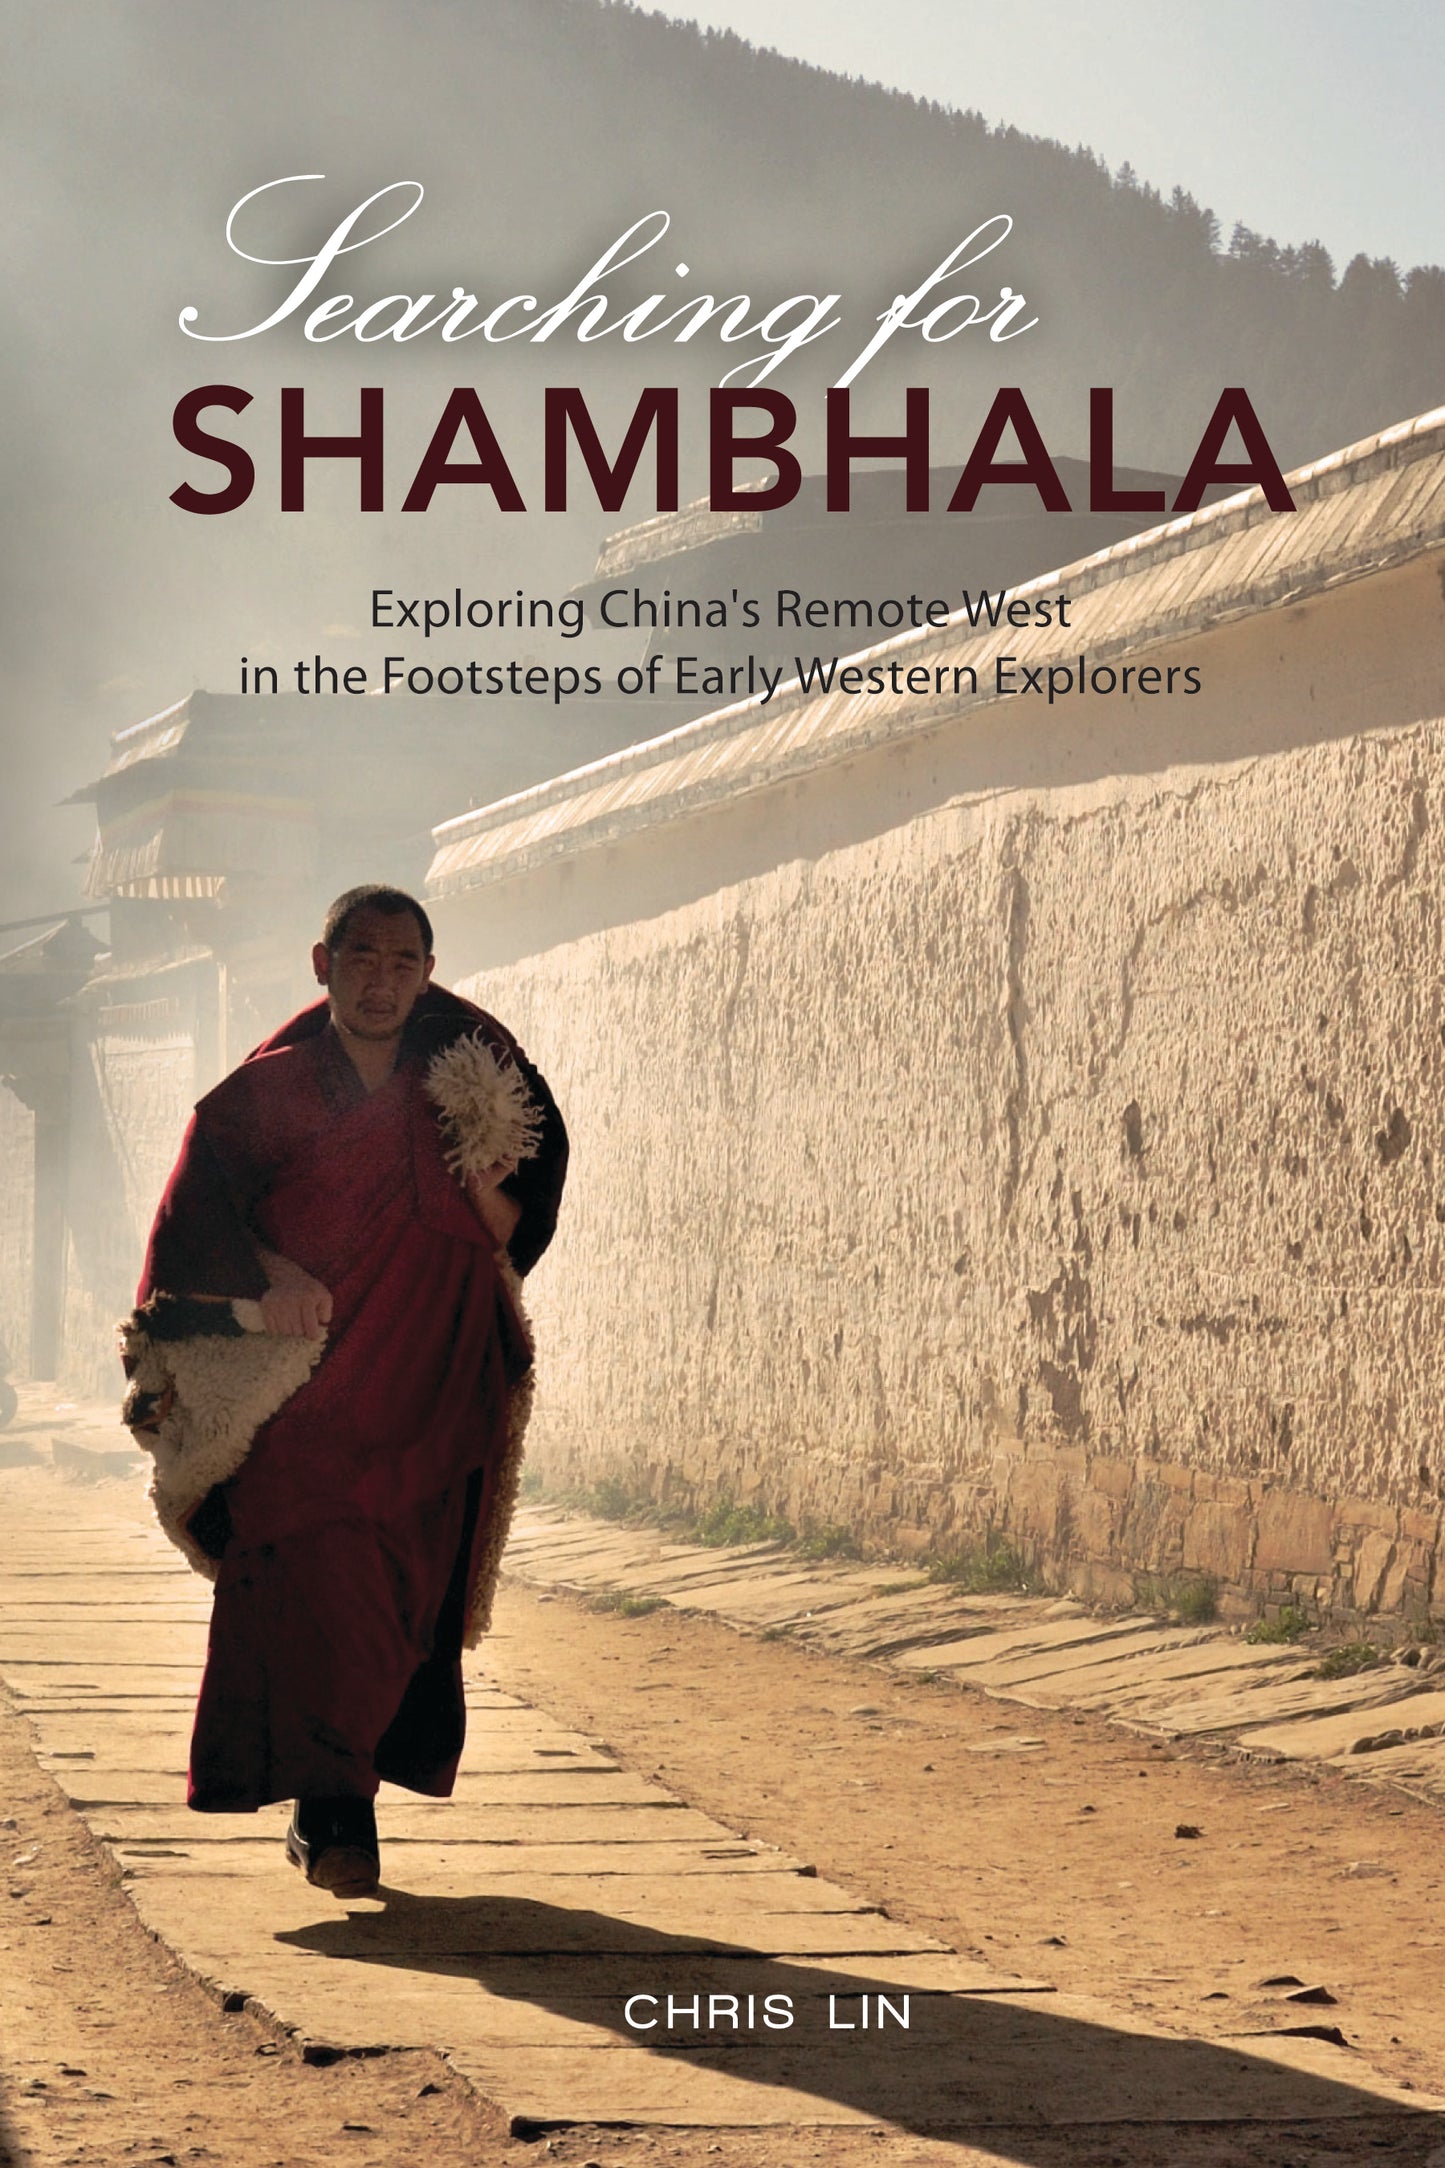 Searching for Shambhala: Exploring China's Remote West in the Footsteps of Early Western Explorers